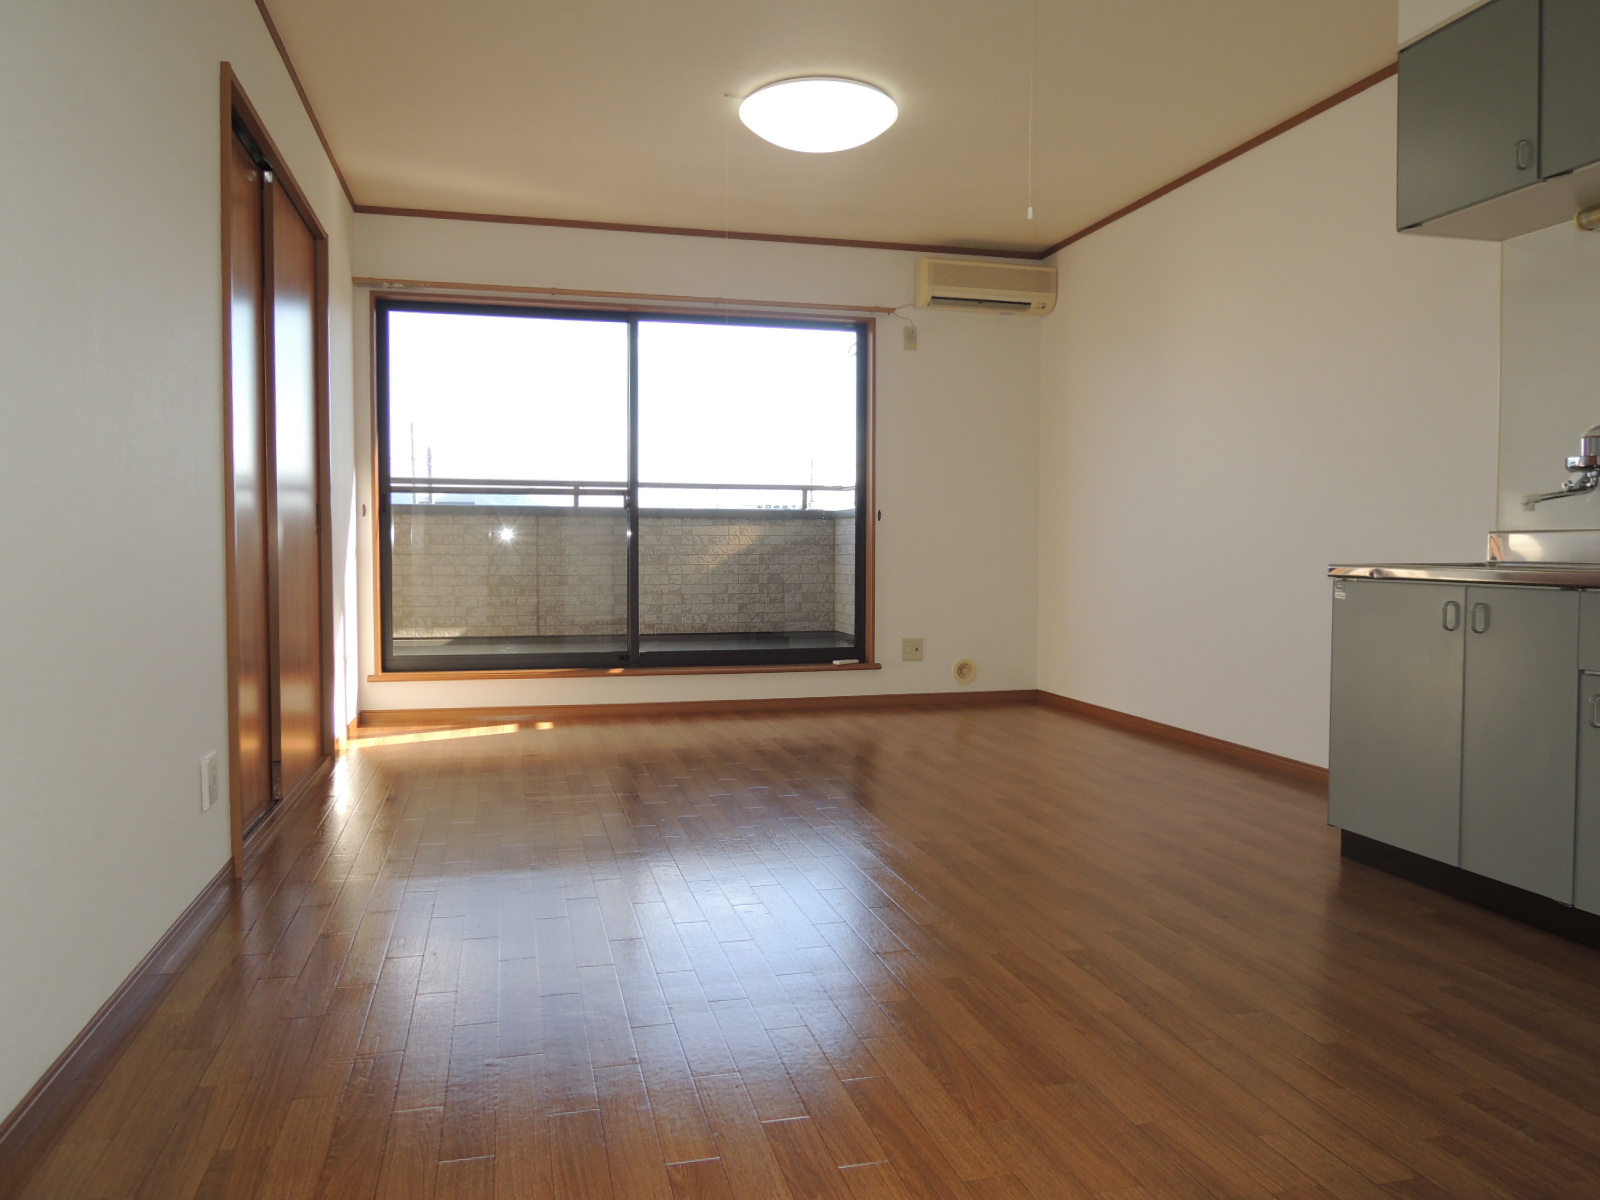 Living and room. LDK11 is tatami